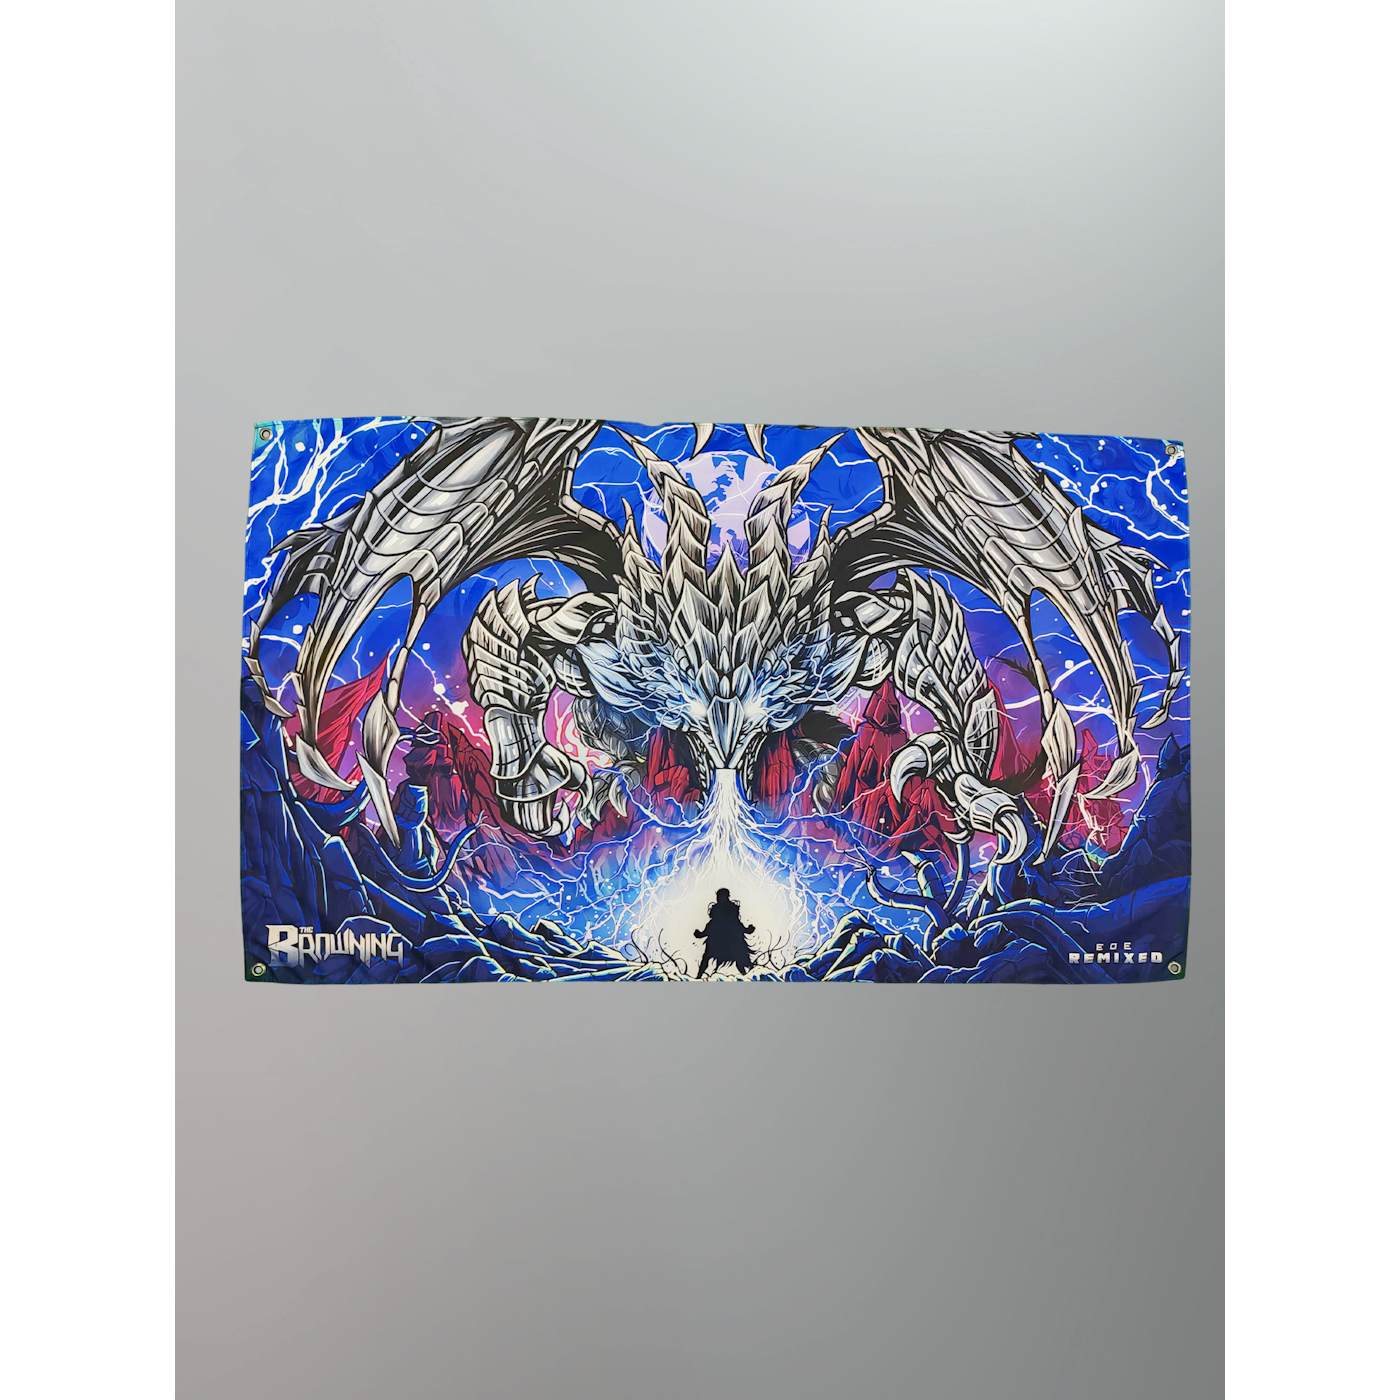 The Browning - End of Existence Remixed 3x5 Wall Flag